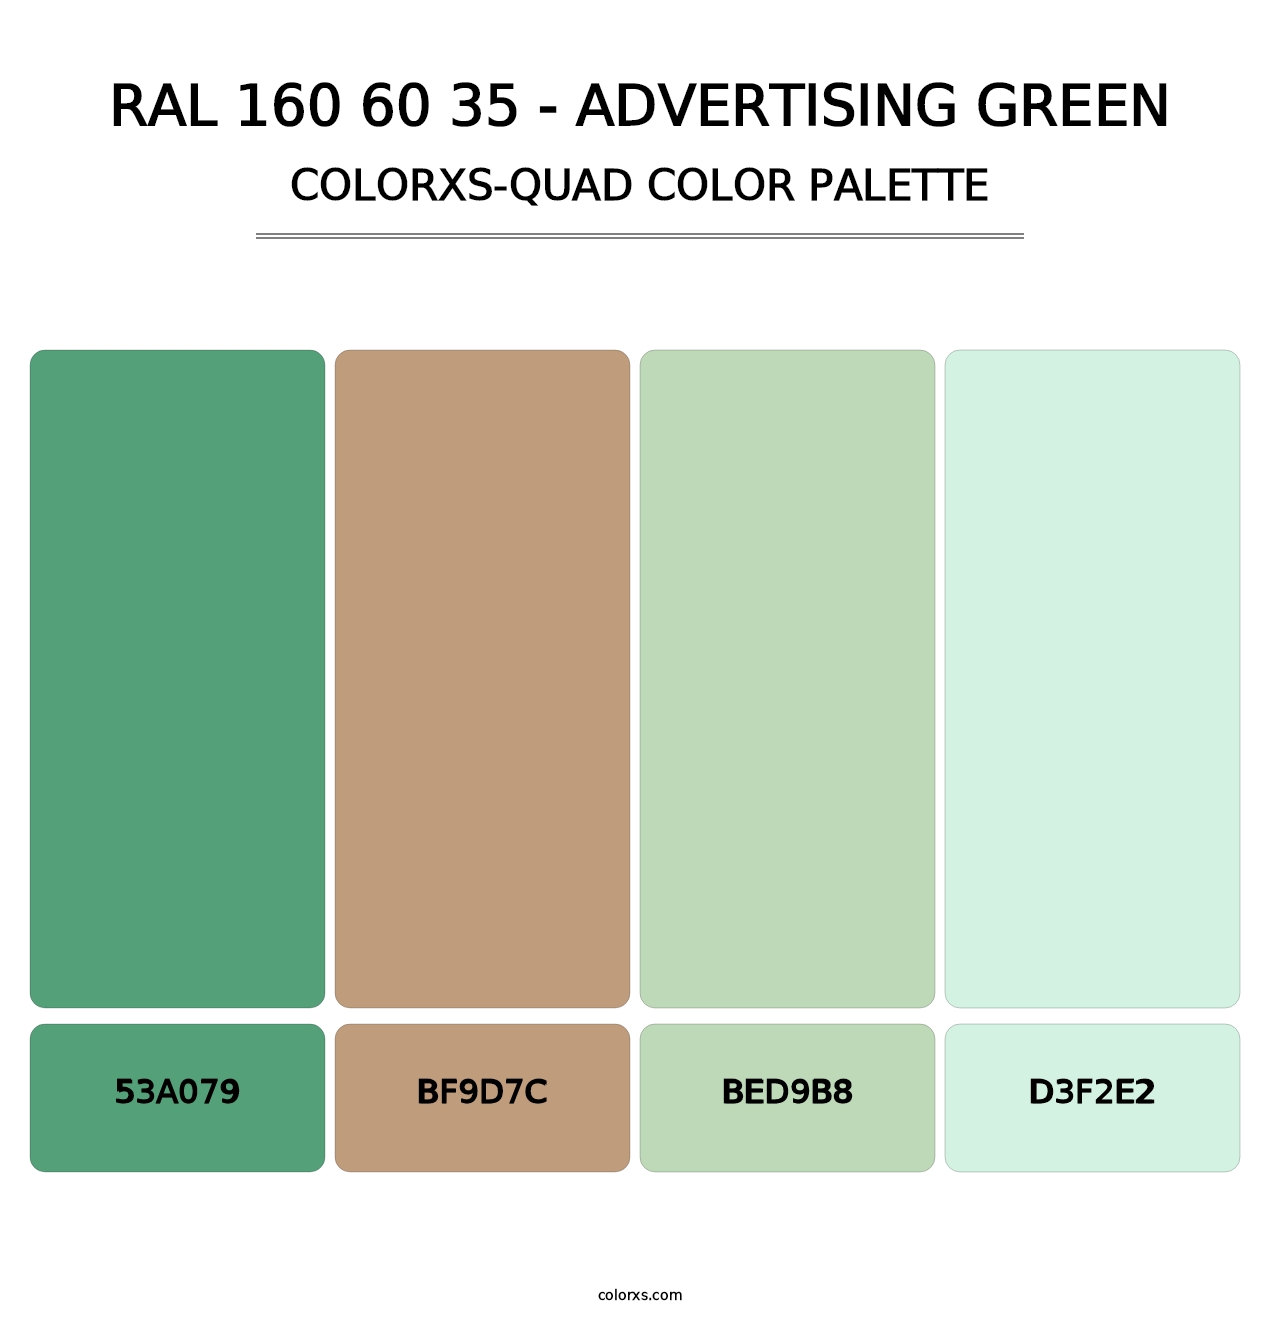 RAL 160 60 35 - Advertising Green - Colorxs Quad Palette